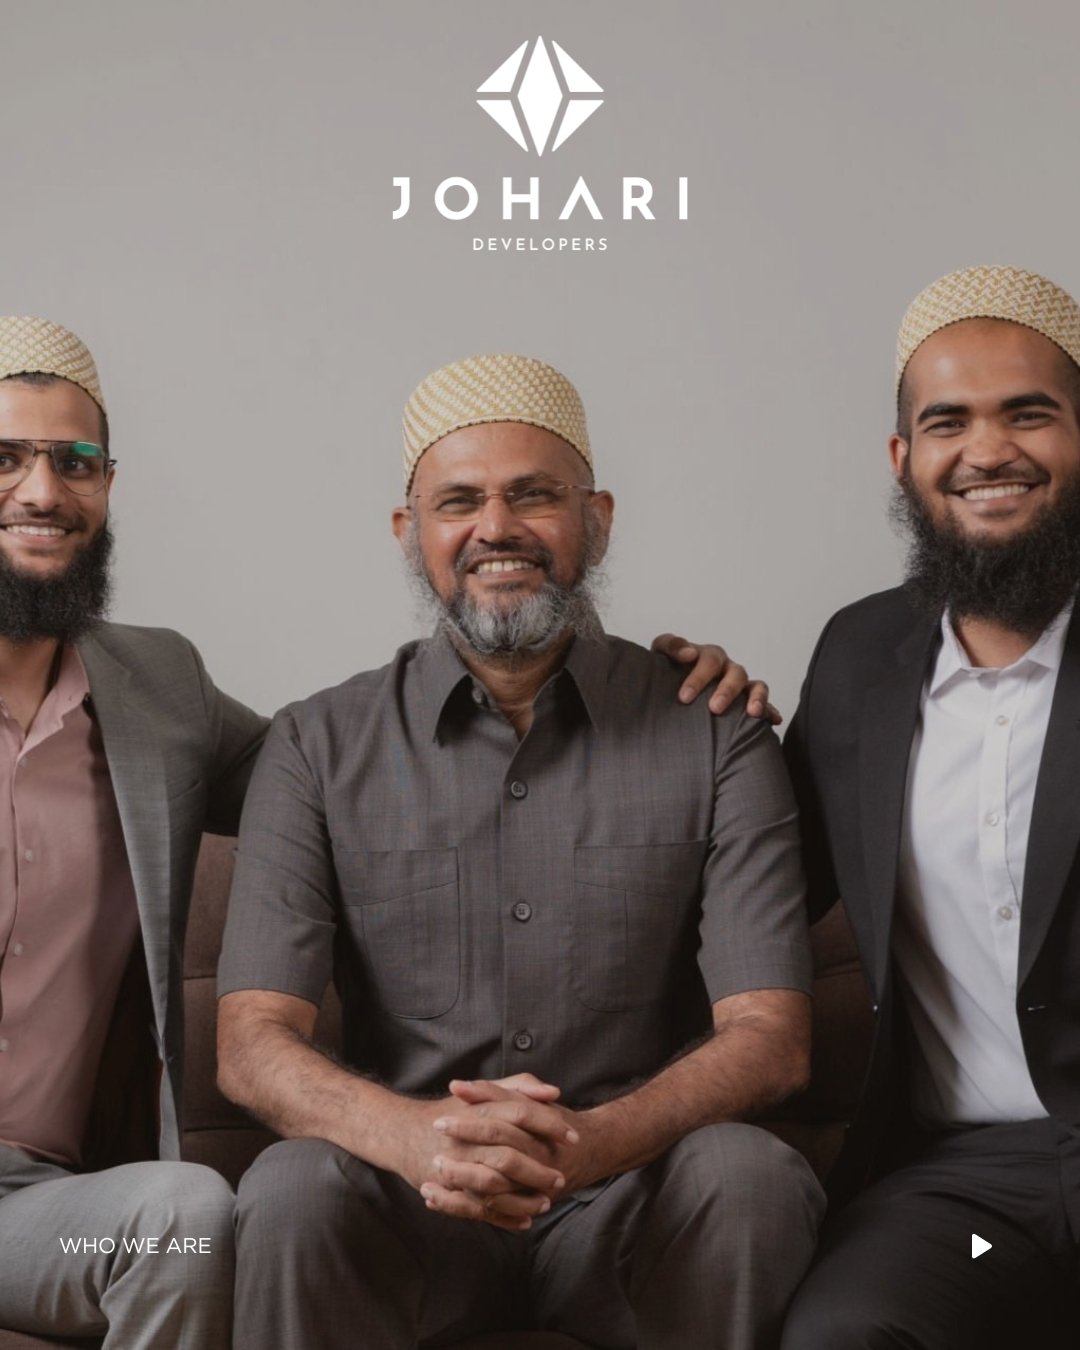 Meet Johari Developers, a family company with a mission to transform the landscape of Tanzania one jewel at a time. Swipe left to discover our story.